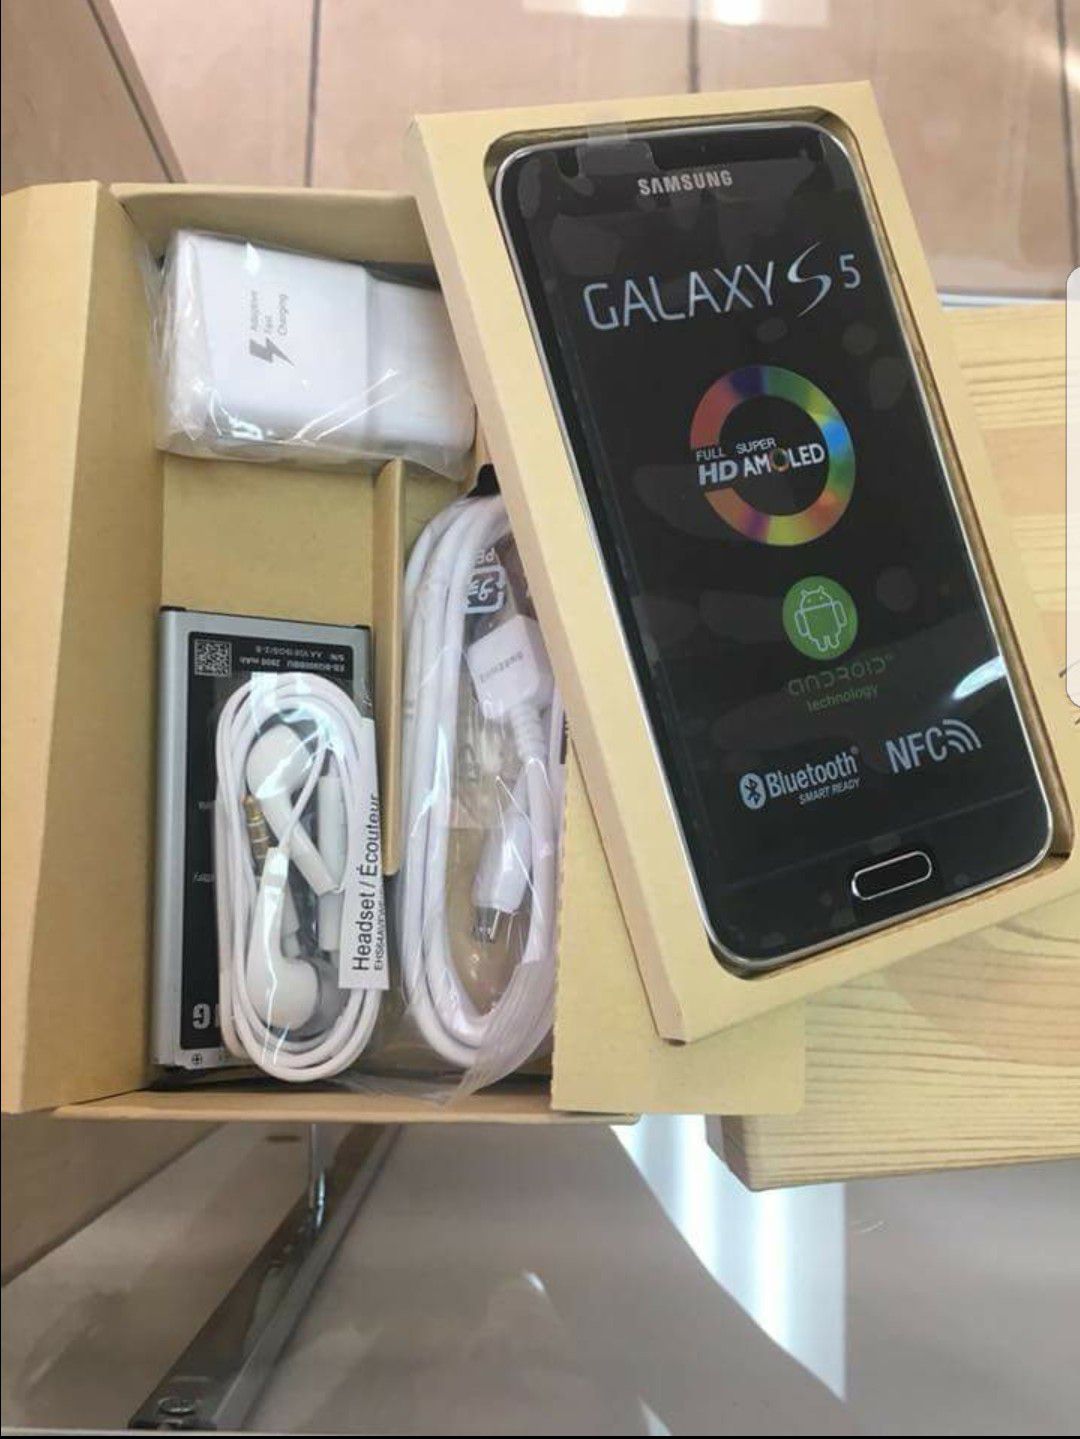 Samsung Galaxy S5. Factory Unlocked and Usable with Any Company Carrier SIM Any Country